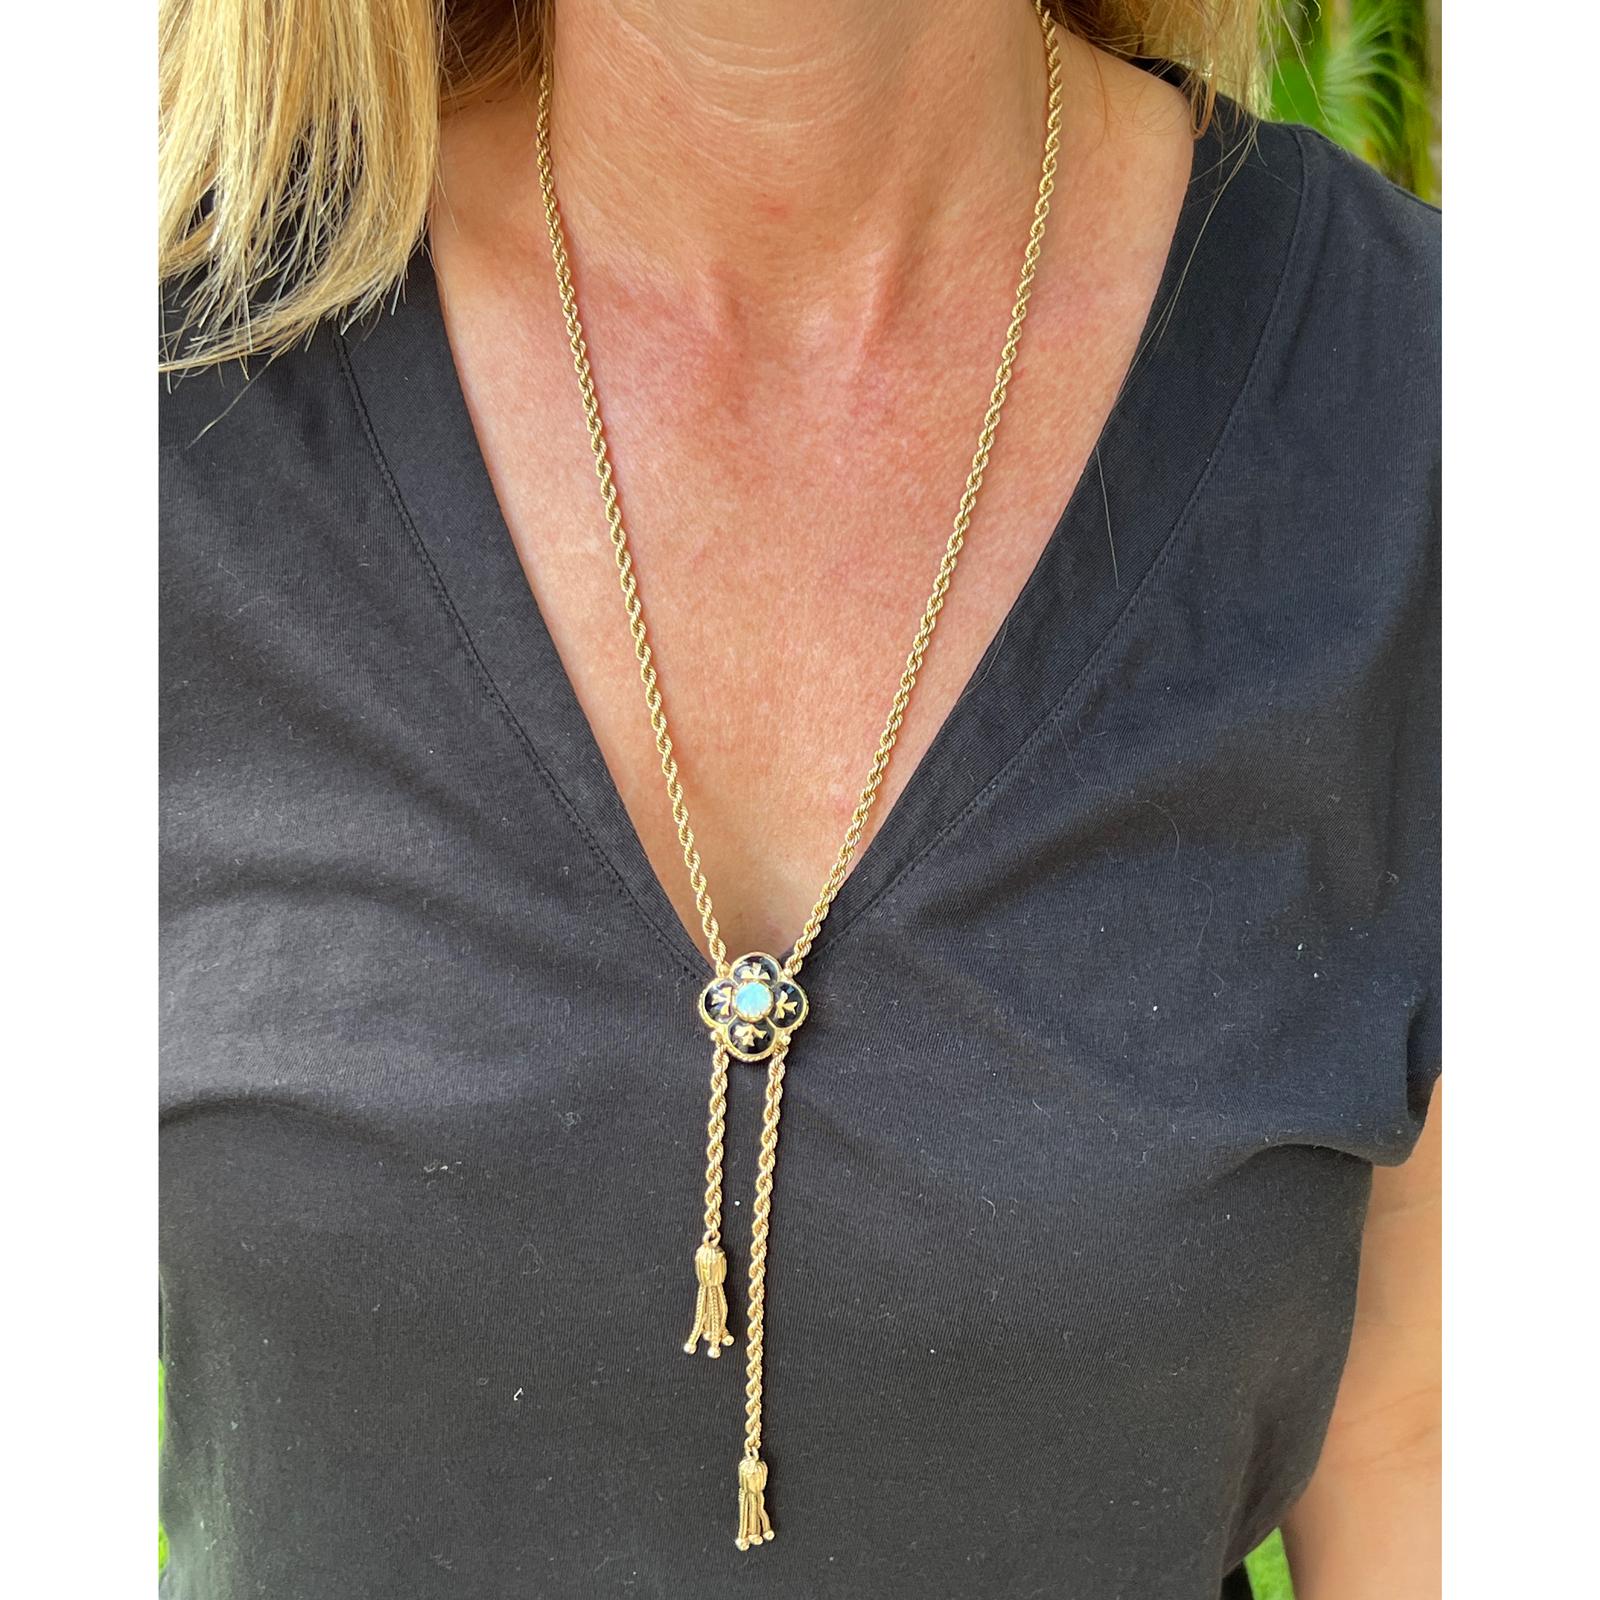 Victorian antique slide necklace fashioned in 14 karat yellow gold. The necklace features an opal and black enamel clover shape slide, rope chain measuring 26 inches, and tassel ends. The enamel is in excellent condition.  Weight: 10.4 grams. 